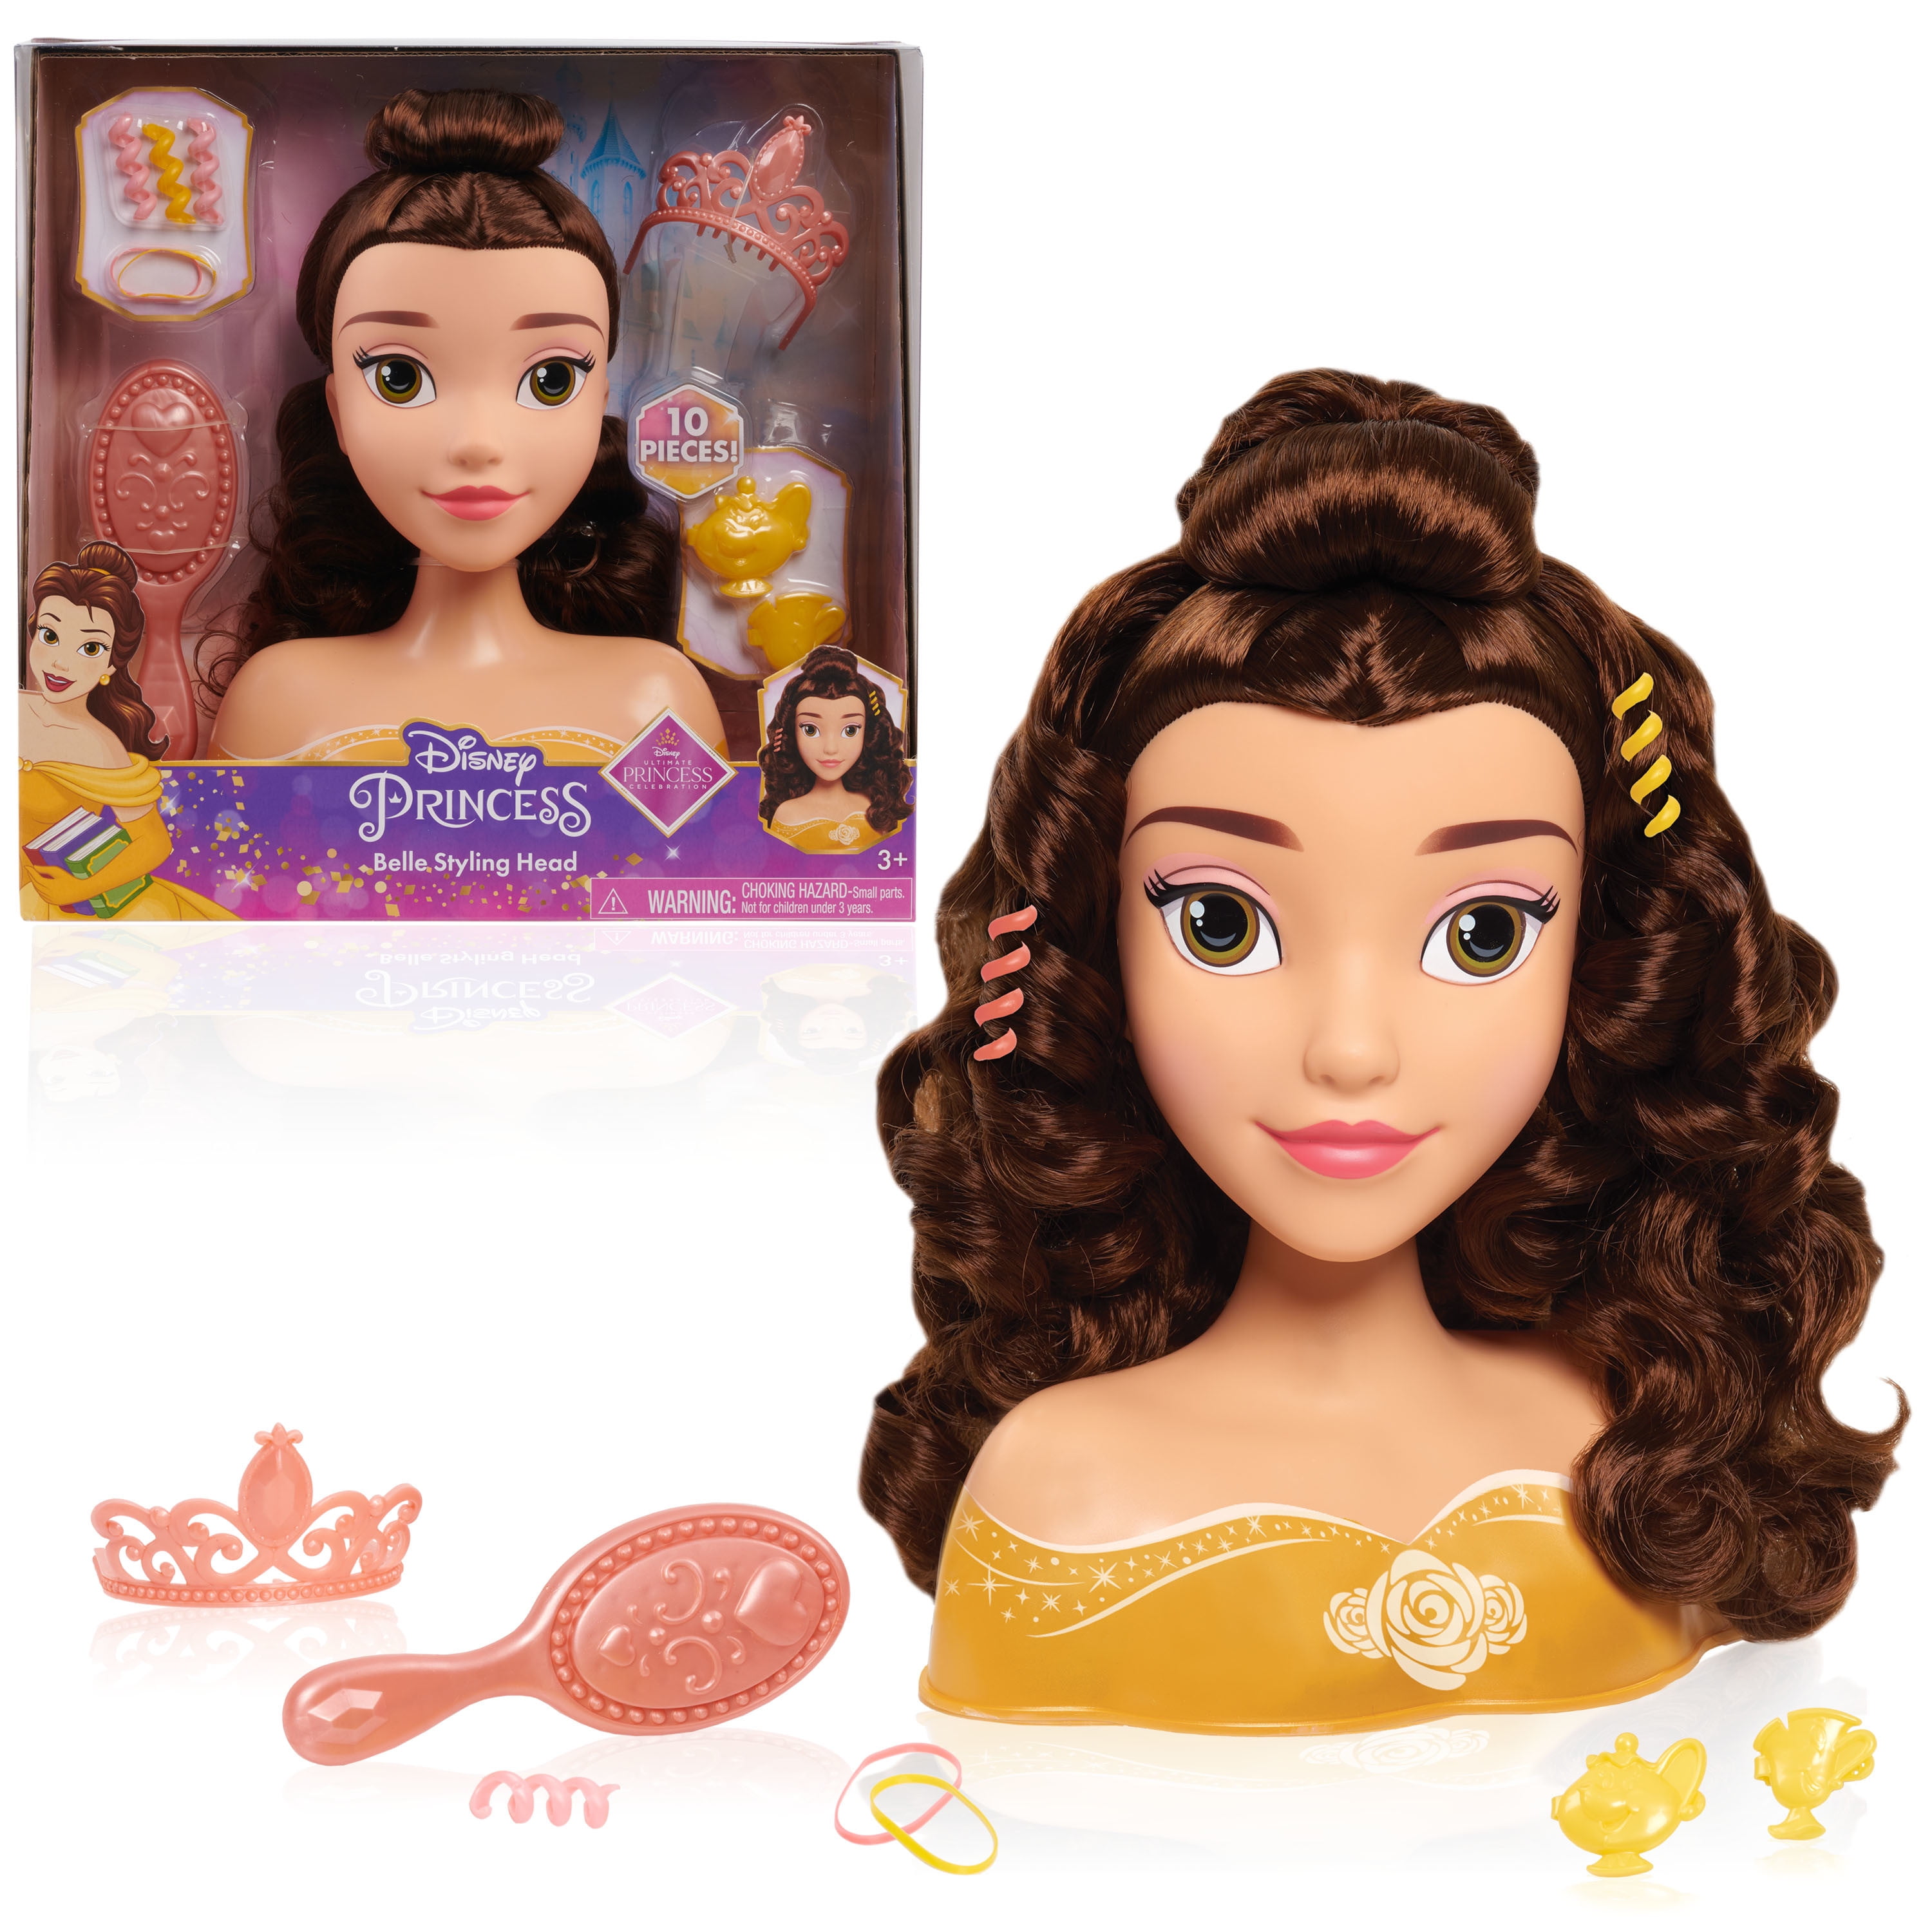 From Beauty and the Beast Styling Head Disney Princess Deluxe Belle 